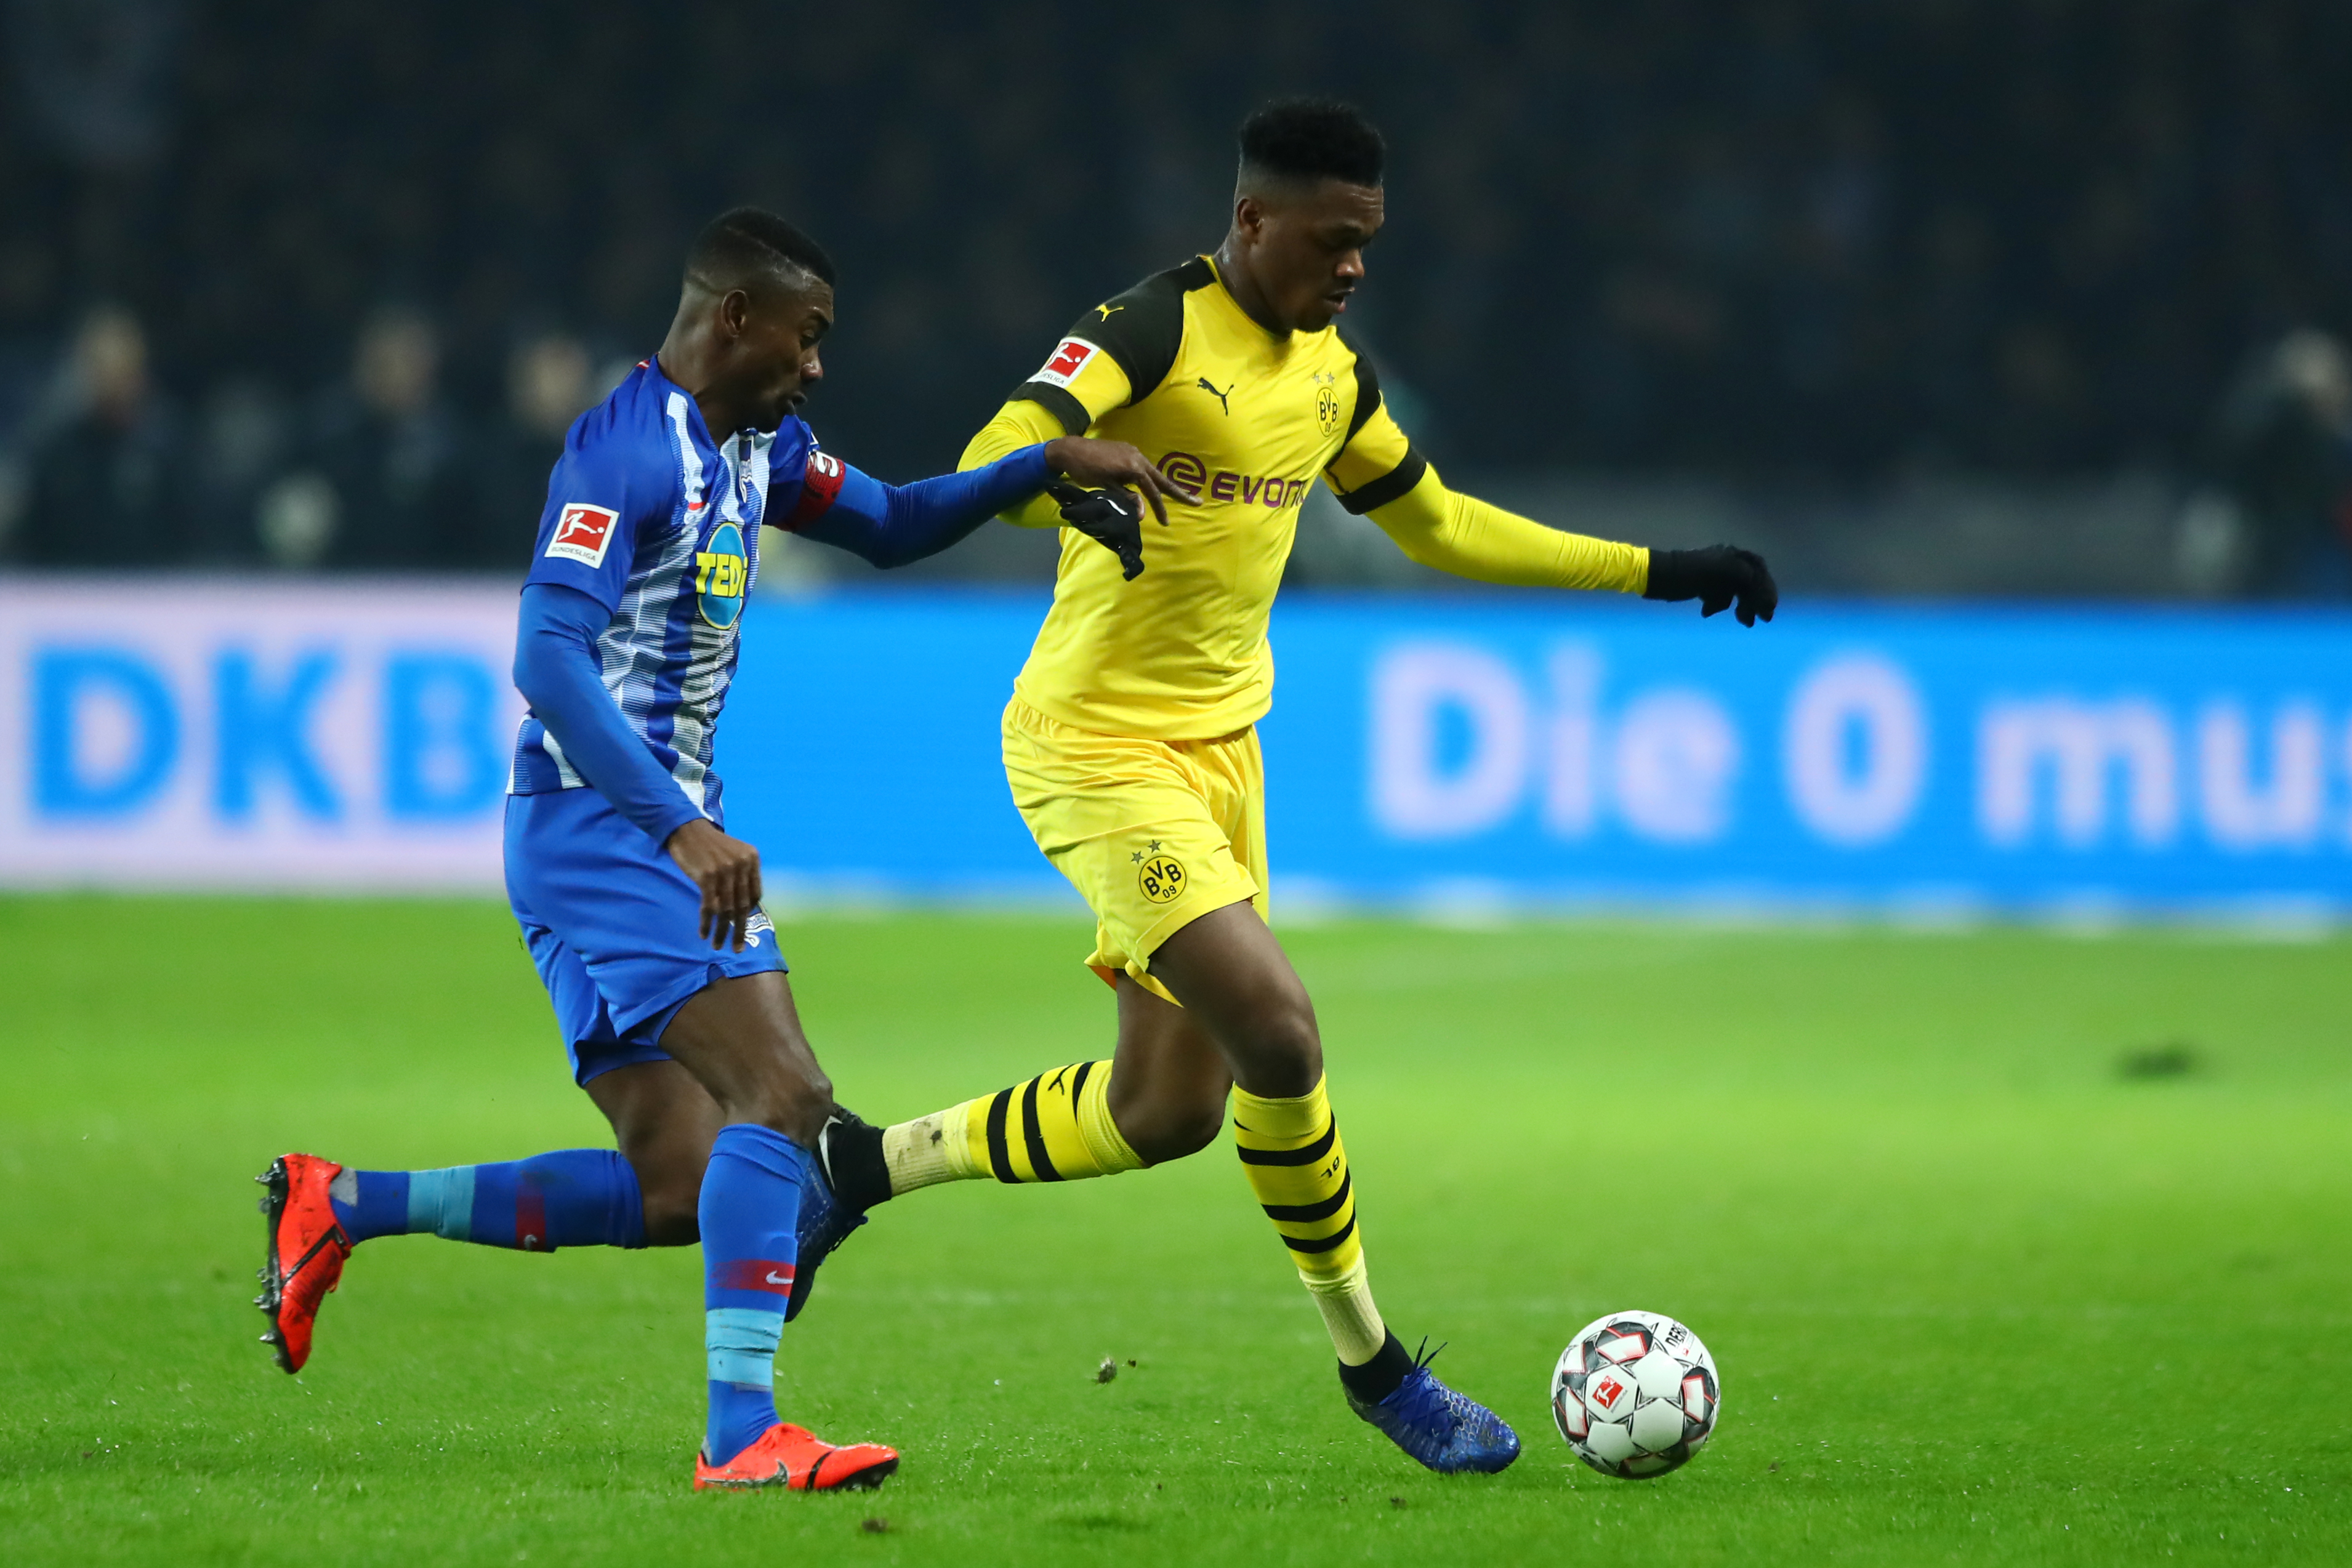 Dan-Axel Zagadou is a free agent this summer. (Photo by Martin Rose/Bongarts/Getty Images)